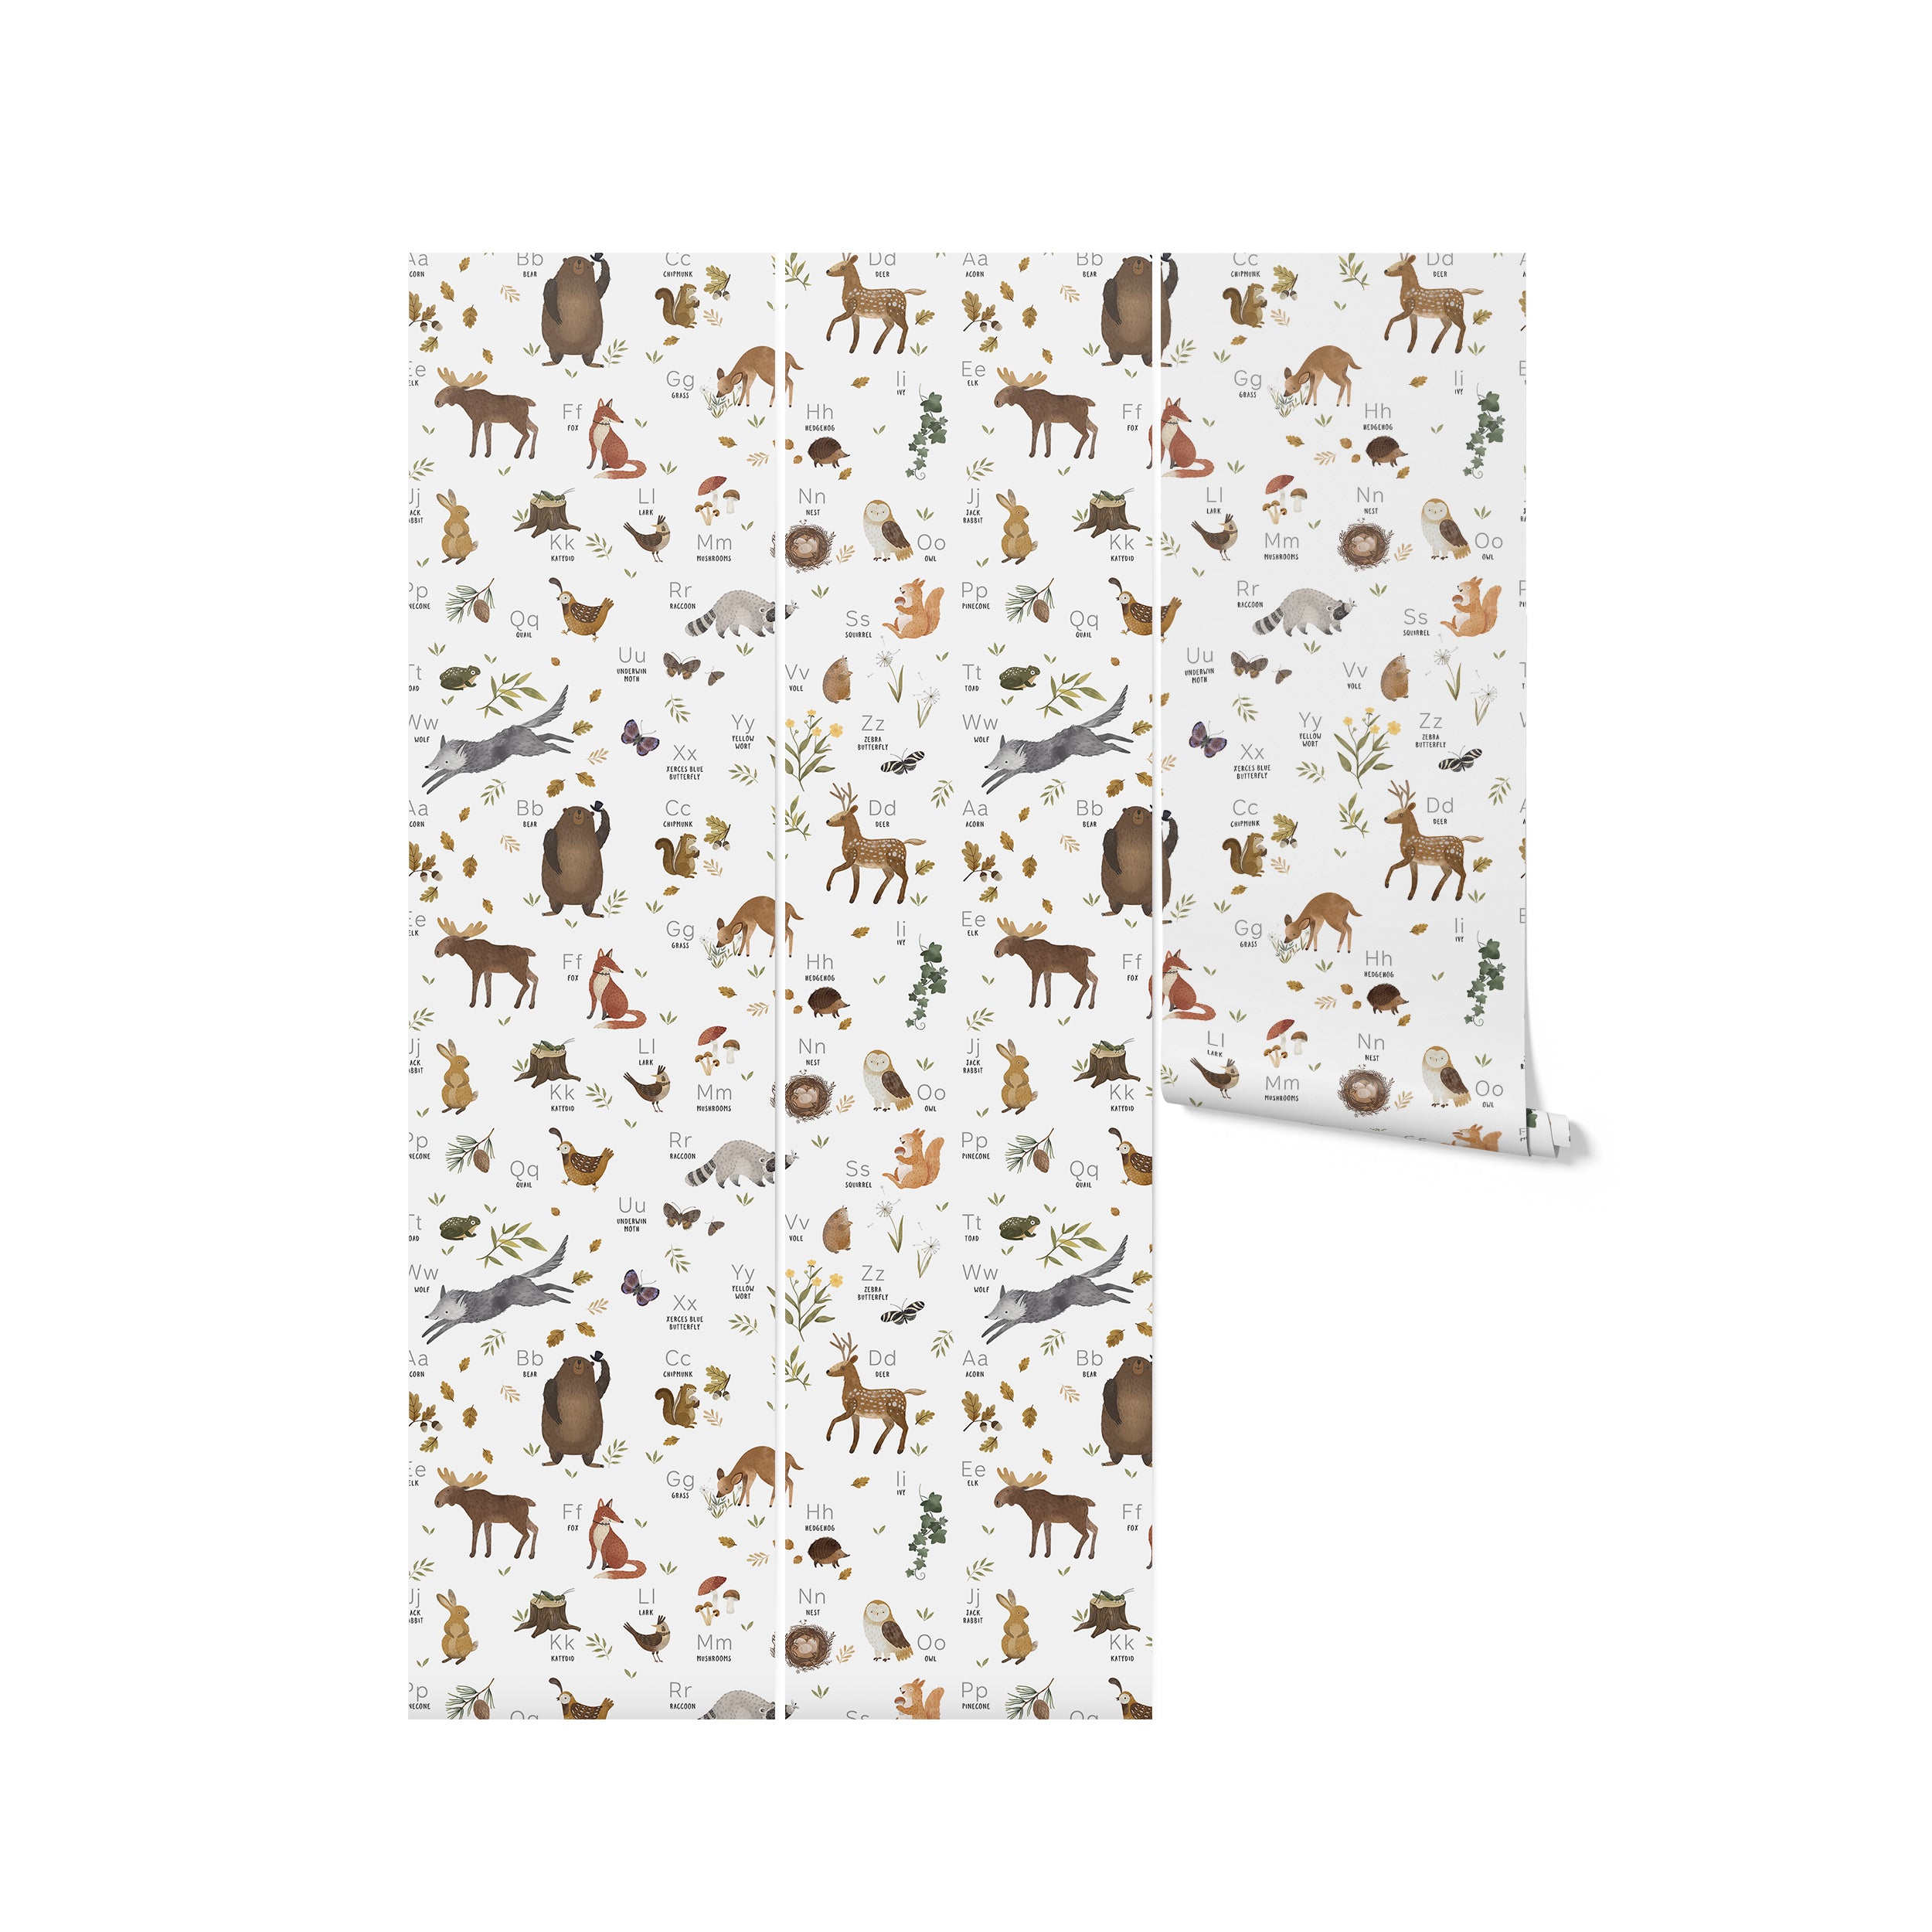  A roll of 'Forest Alphabet Animal Wallpaper' set against a white backdrop. The paper unfolds to reveal a whimsical pattern of woodland wildlife and letters, ideal for a child's nursery or playroom, combining both a love for nature with the beginnings of language learning in a delightful design.